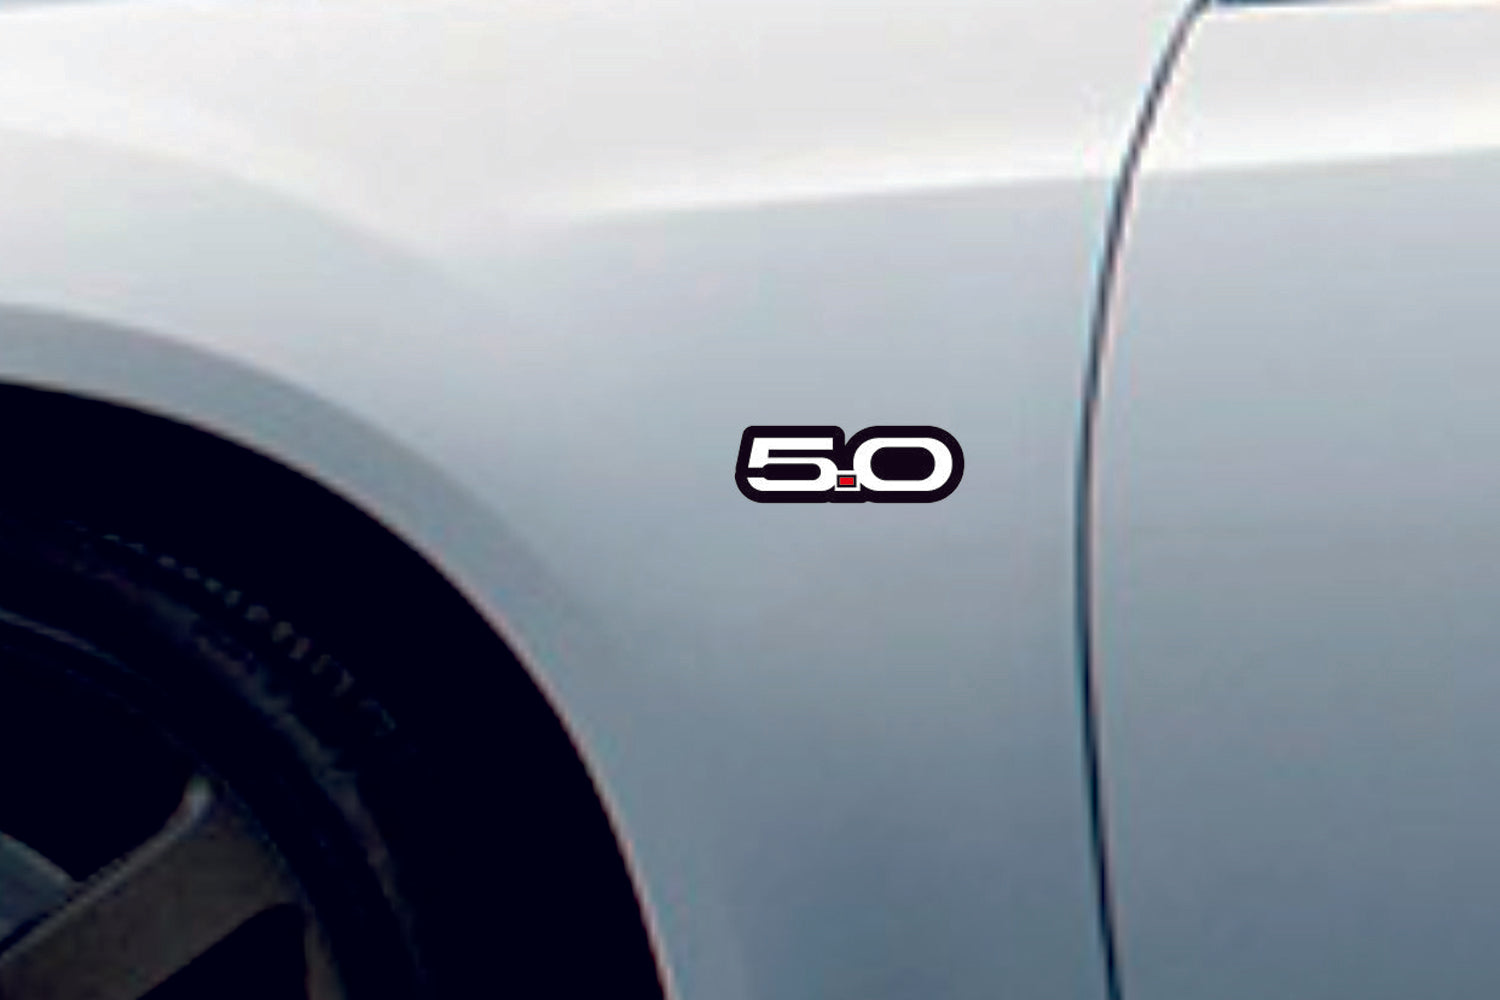 Ford Mustang emblem for fenders with 5.0 logo - decoinfabric